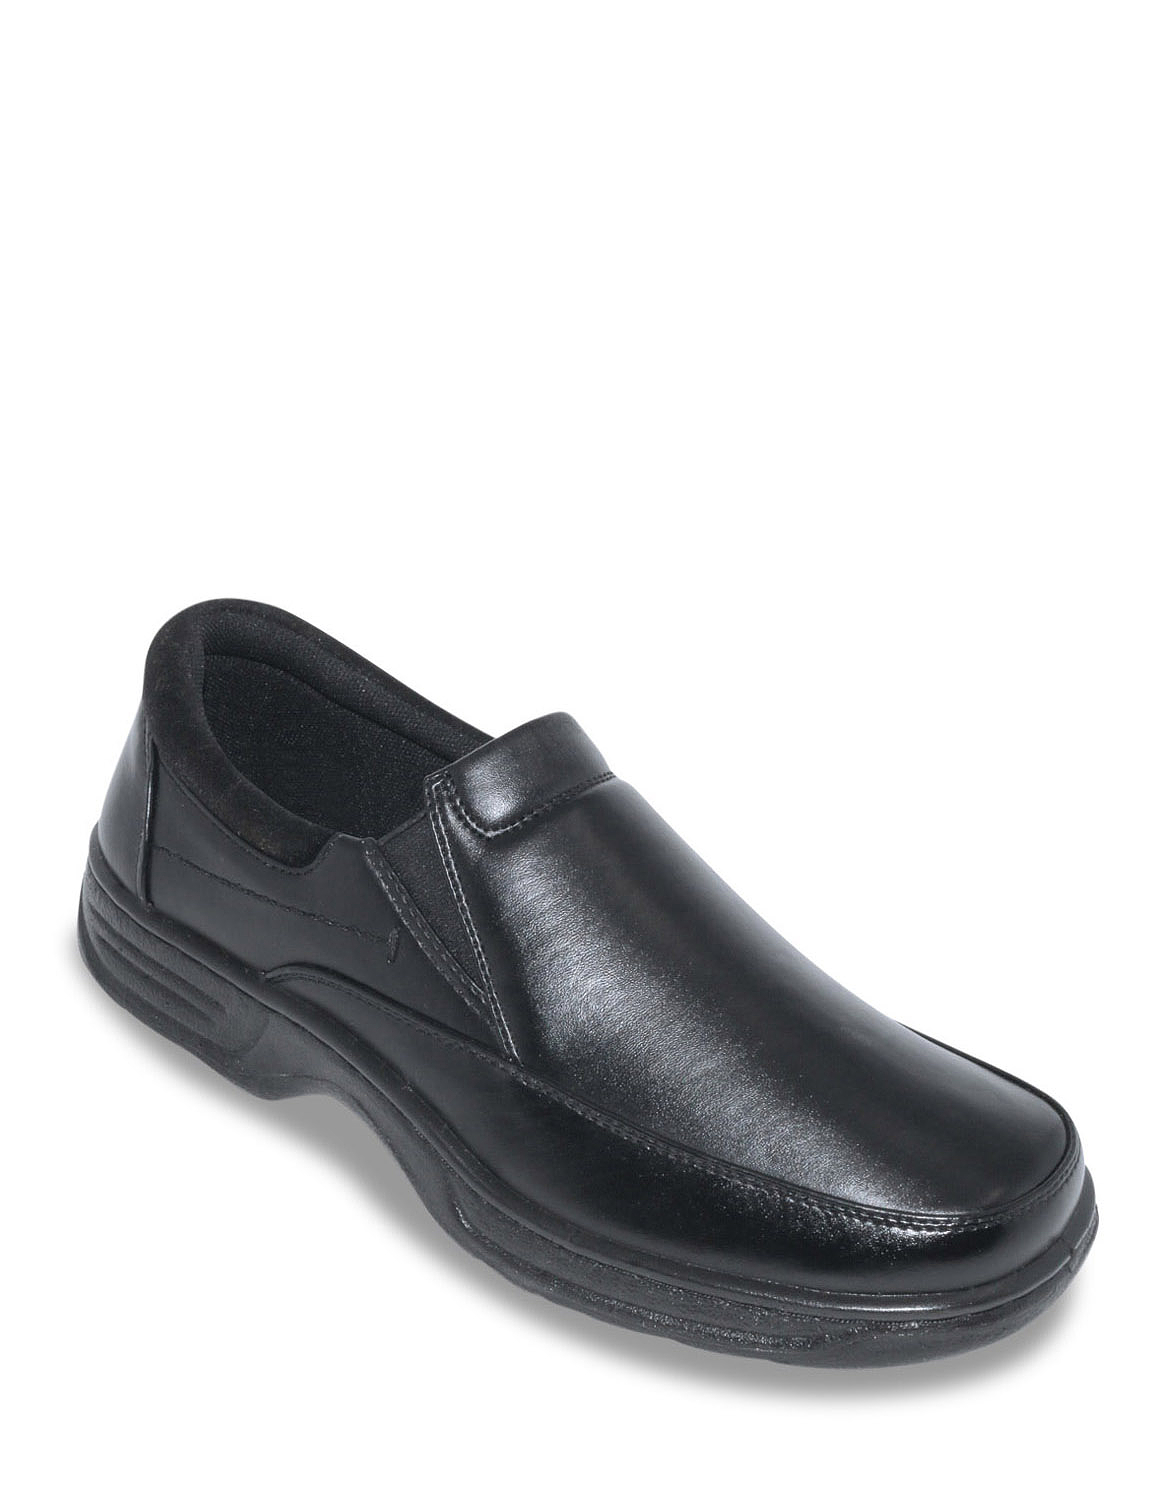 wide slip on shoes